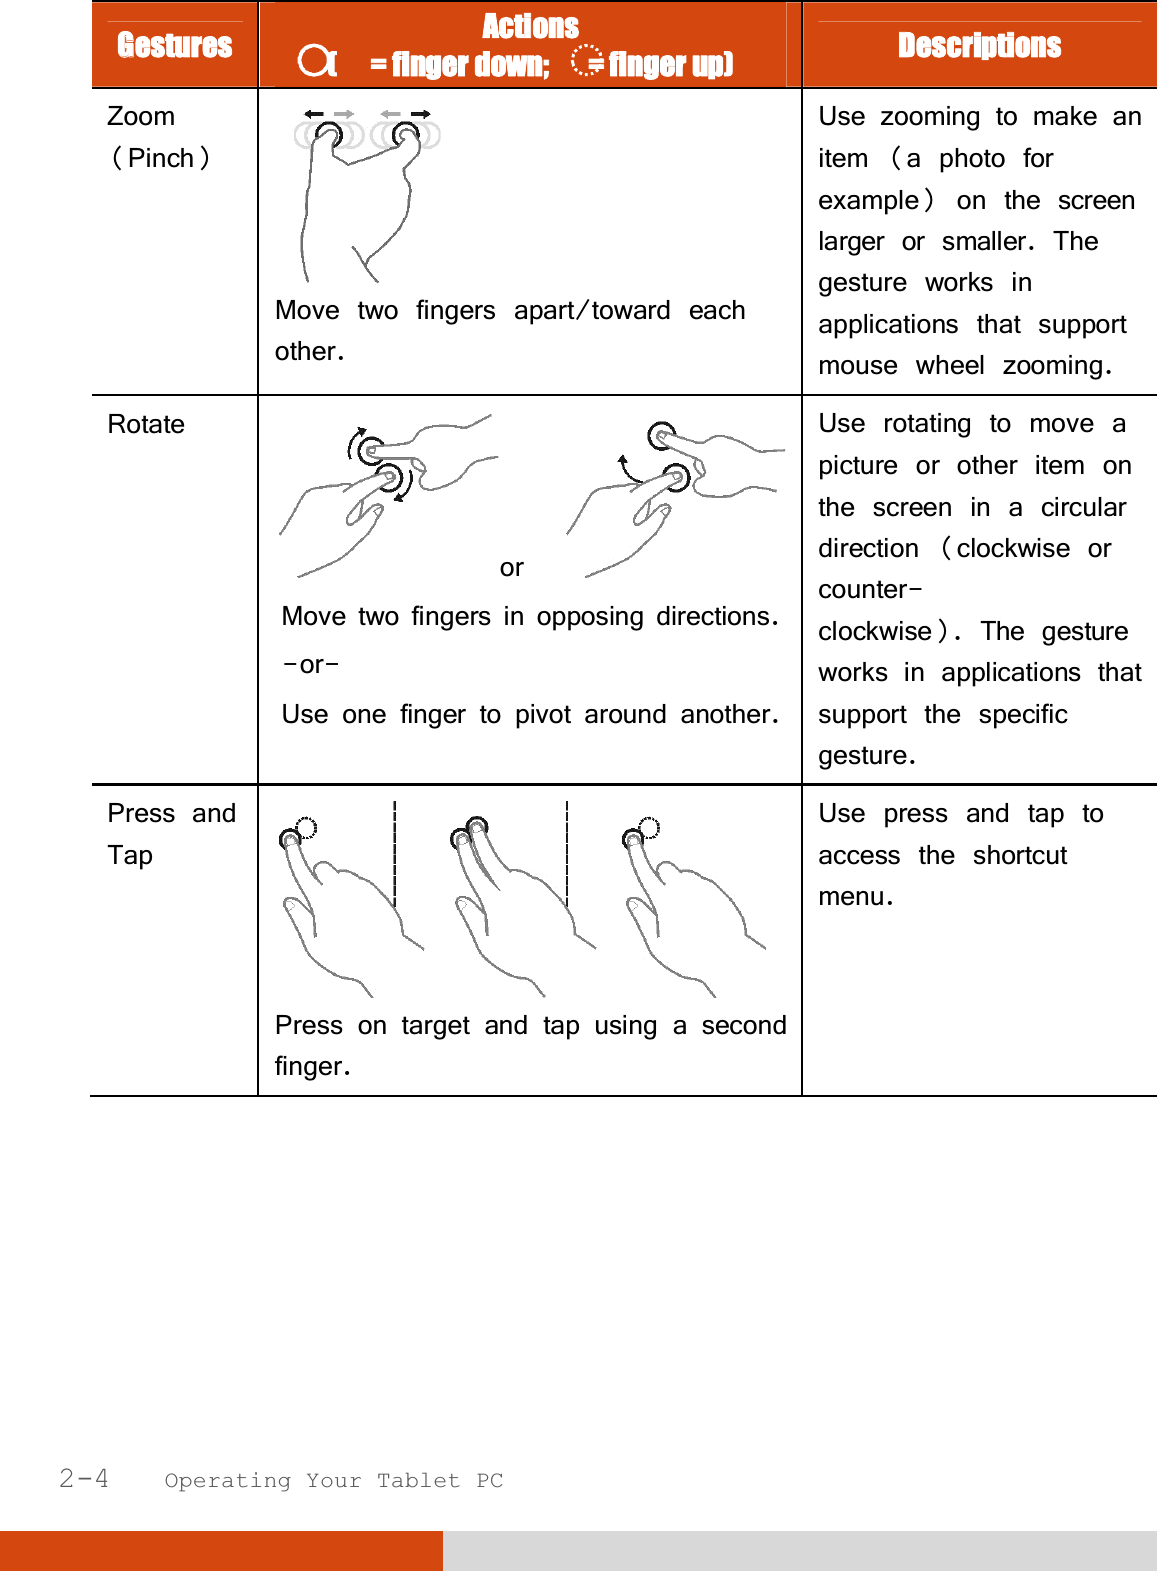  2-4   Operating Your Tablet PC GGestures  Actions (      = finger down;       = finger up)  Descriptions Zoom (Pinch)  Move two fingers apart/toward each other. Use zooming to make an item (a photo for example) on the screen larger or smaller. The gesture works in applications that support mouse wheel zooming. Rotate or   Move two fingers in opposing directions. -or- Use one finger to pivot around another. Use rotating to move a picture or other item on the screen in a circular direction (clockwise or counter- clockwise). The gesture works in applications that support the specific gesture. Press and Tap  Press on target and tap using a second finger. Use press and tap to access the shortcut menu. 